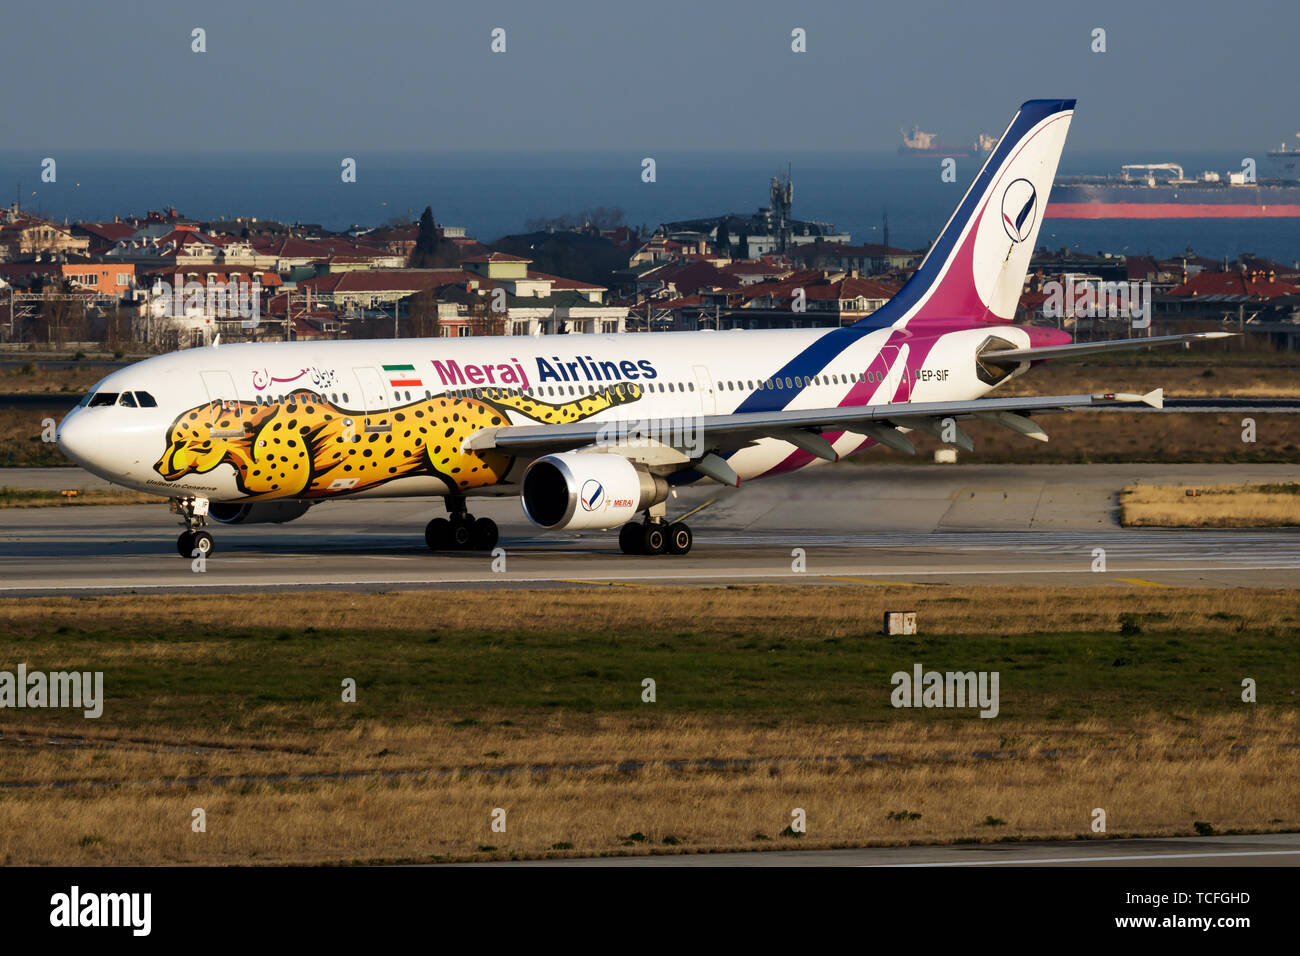 ISTANBUL / TURKEY - MARCH 27, 2019: Meraj Airlines special livery Airbus A300 EP-SIF passenger plane departure at Istanbul Ataturk Airport Stock Photo